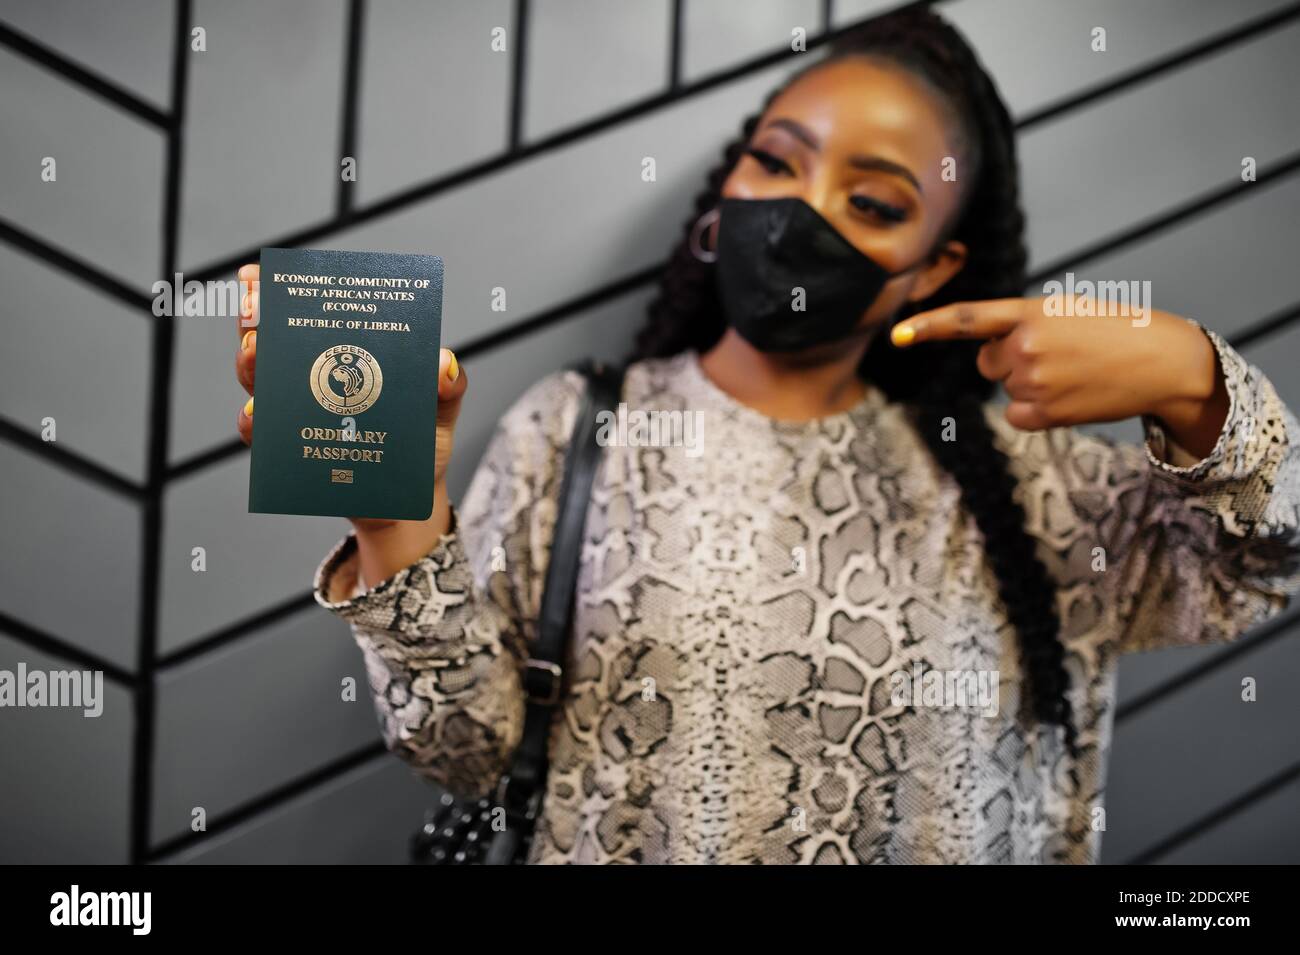 African woman wearing black face mask show Liberia passport in hand. Coronavirus in Africa country, border closure and quarantine, virus outbreak conc Stock Photo